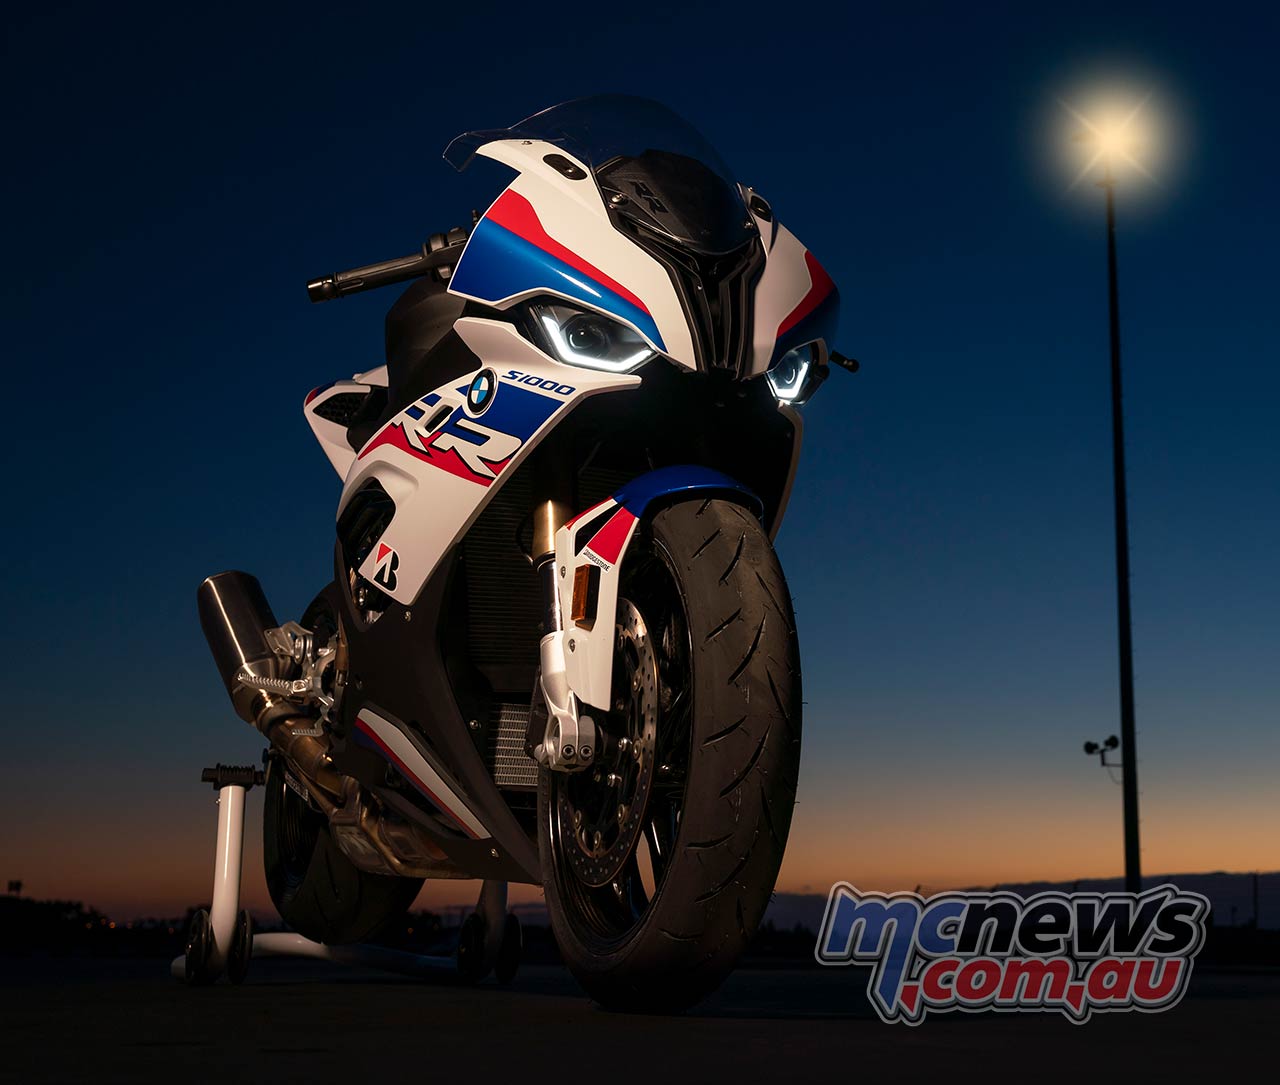 BMW S 1000 RR M Review